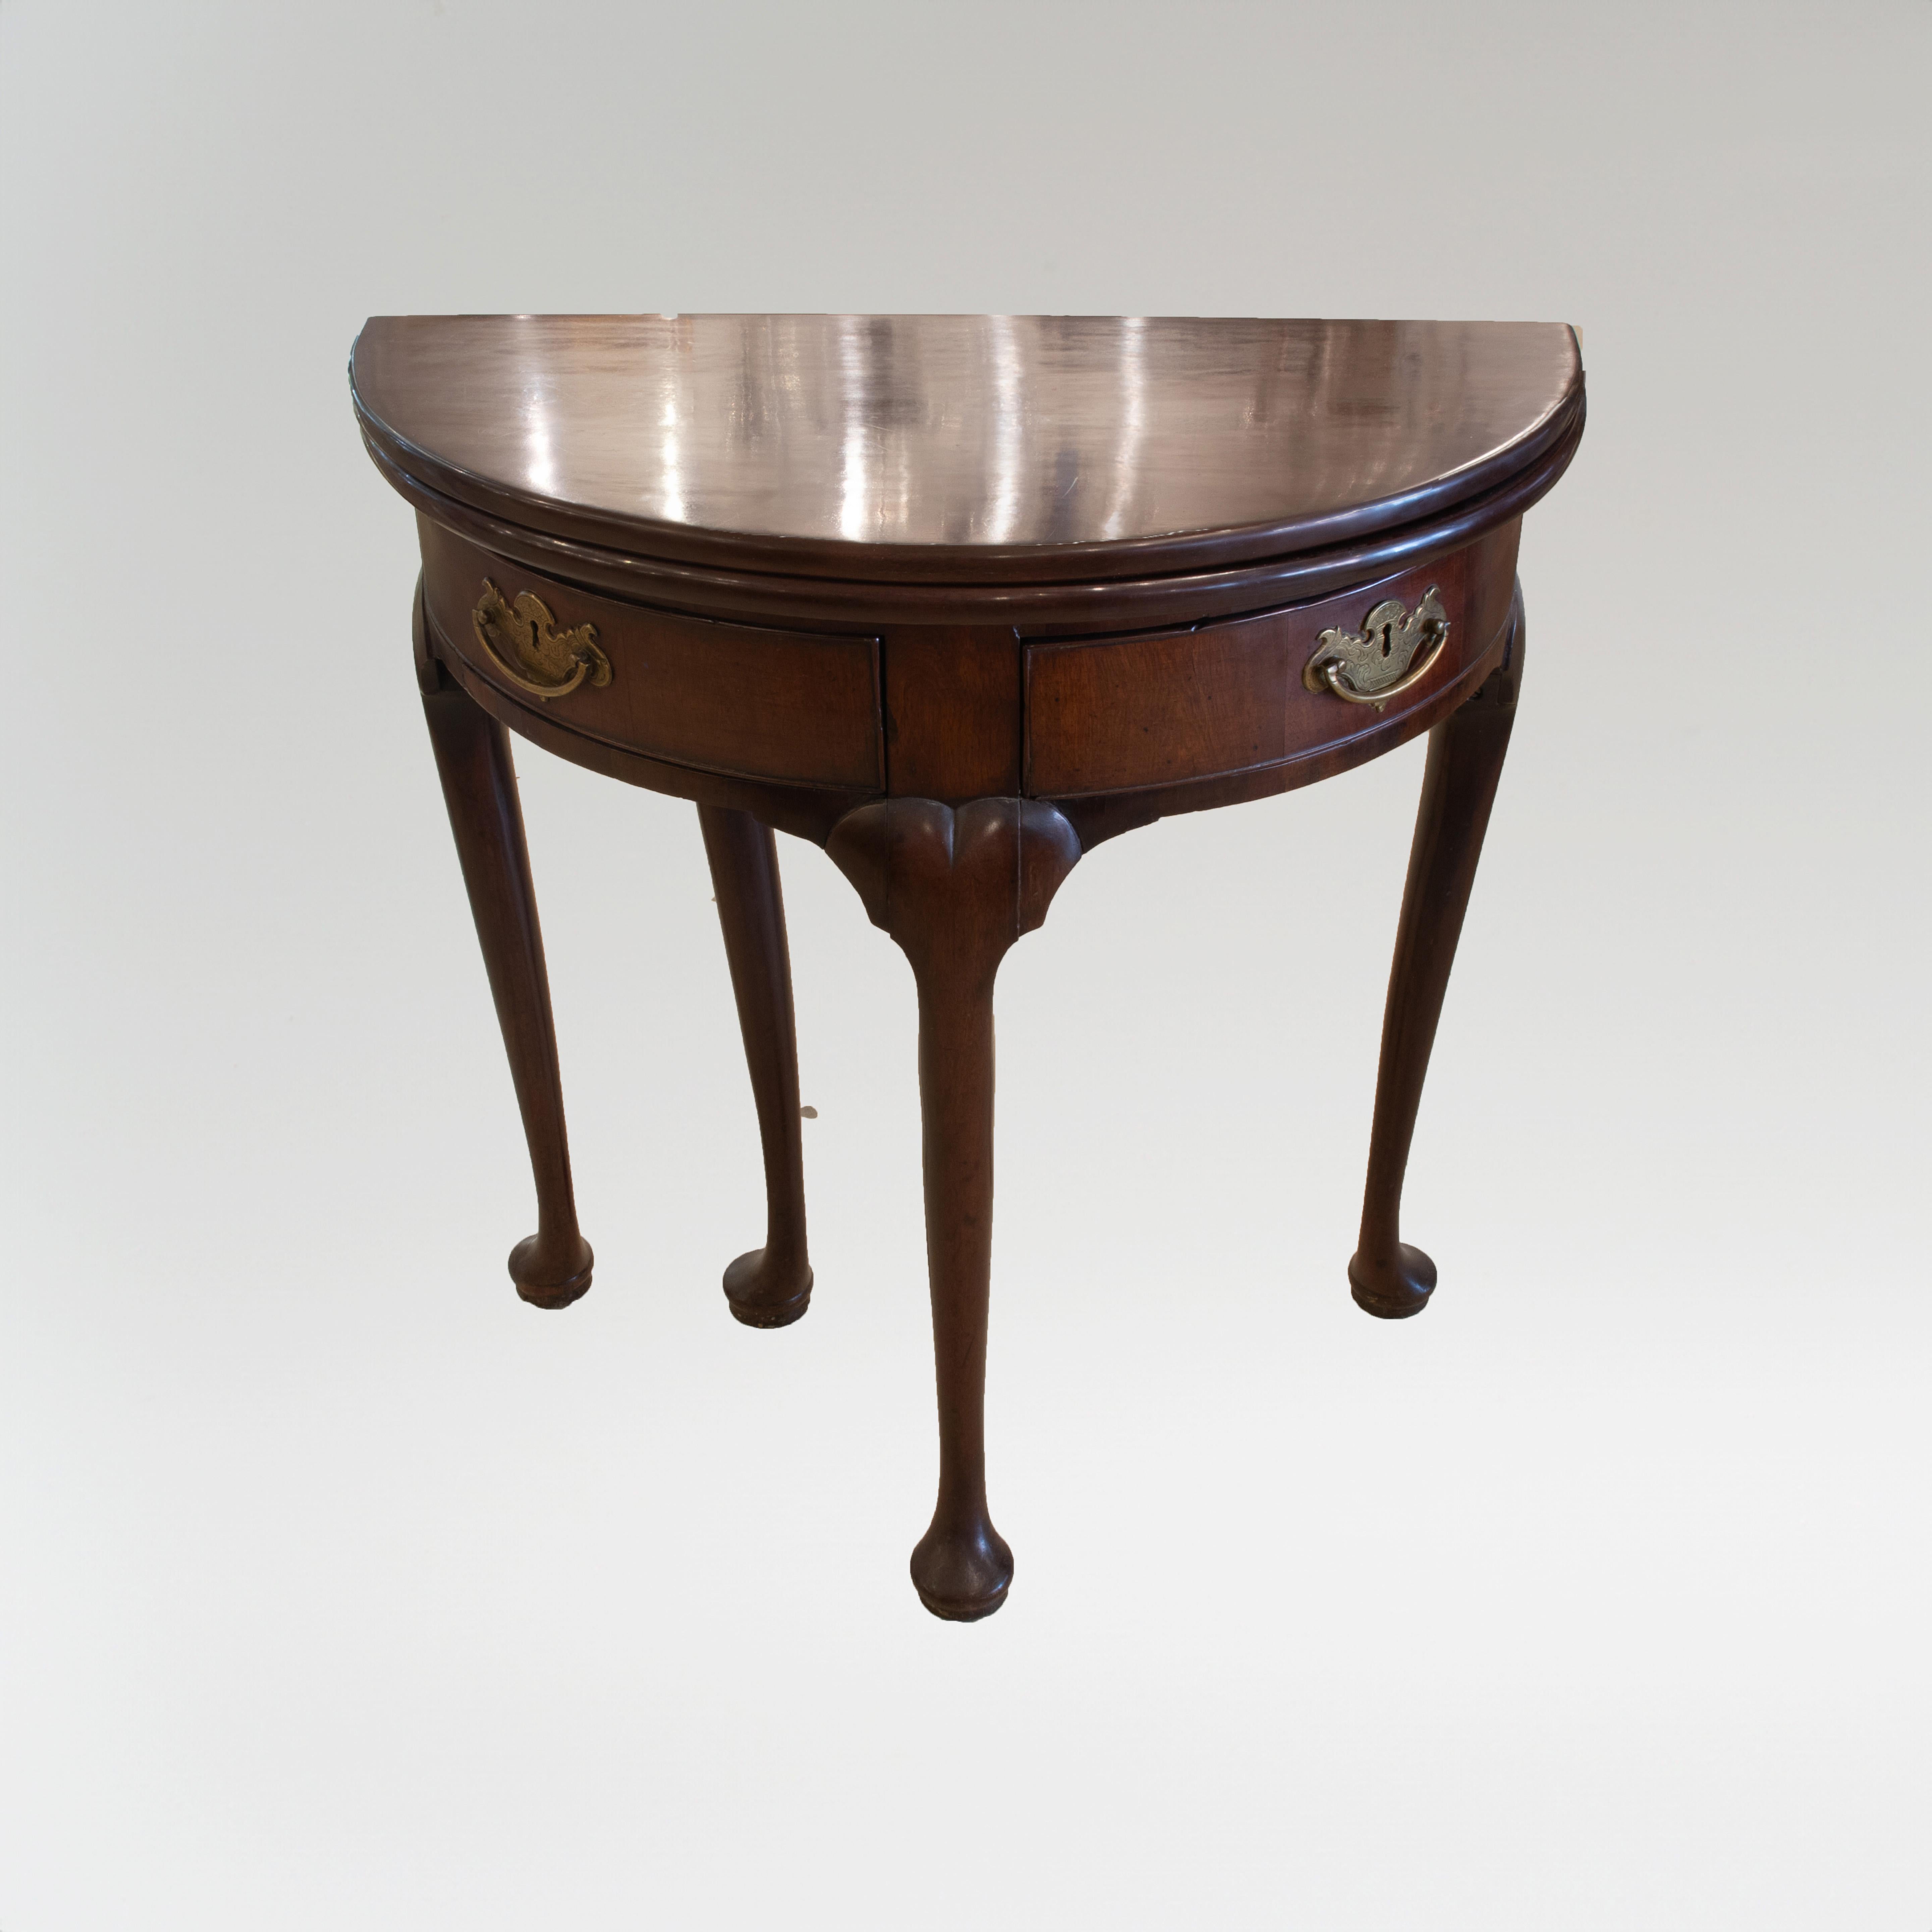 This is a fine George III English mahogany demilune table with two drawers that swing out. The George III style produced exceptional quality pieces that many collectors have deemed the finest examples of furniture design. During this time Georgian